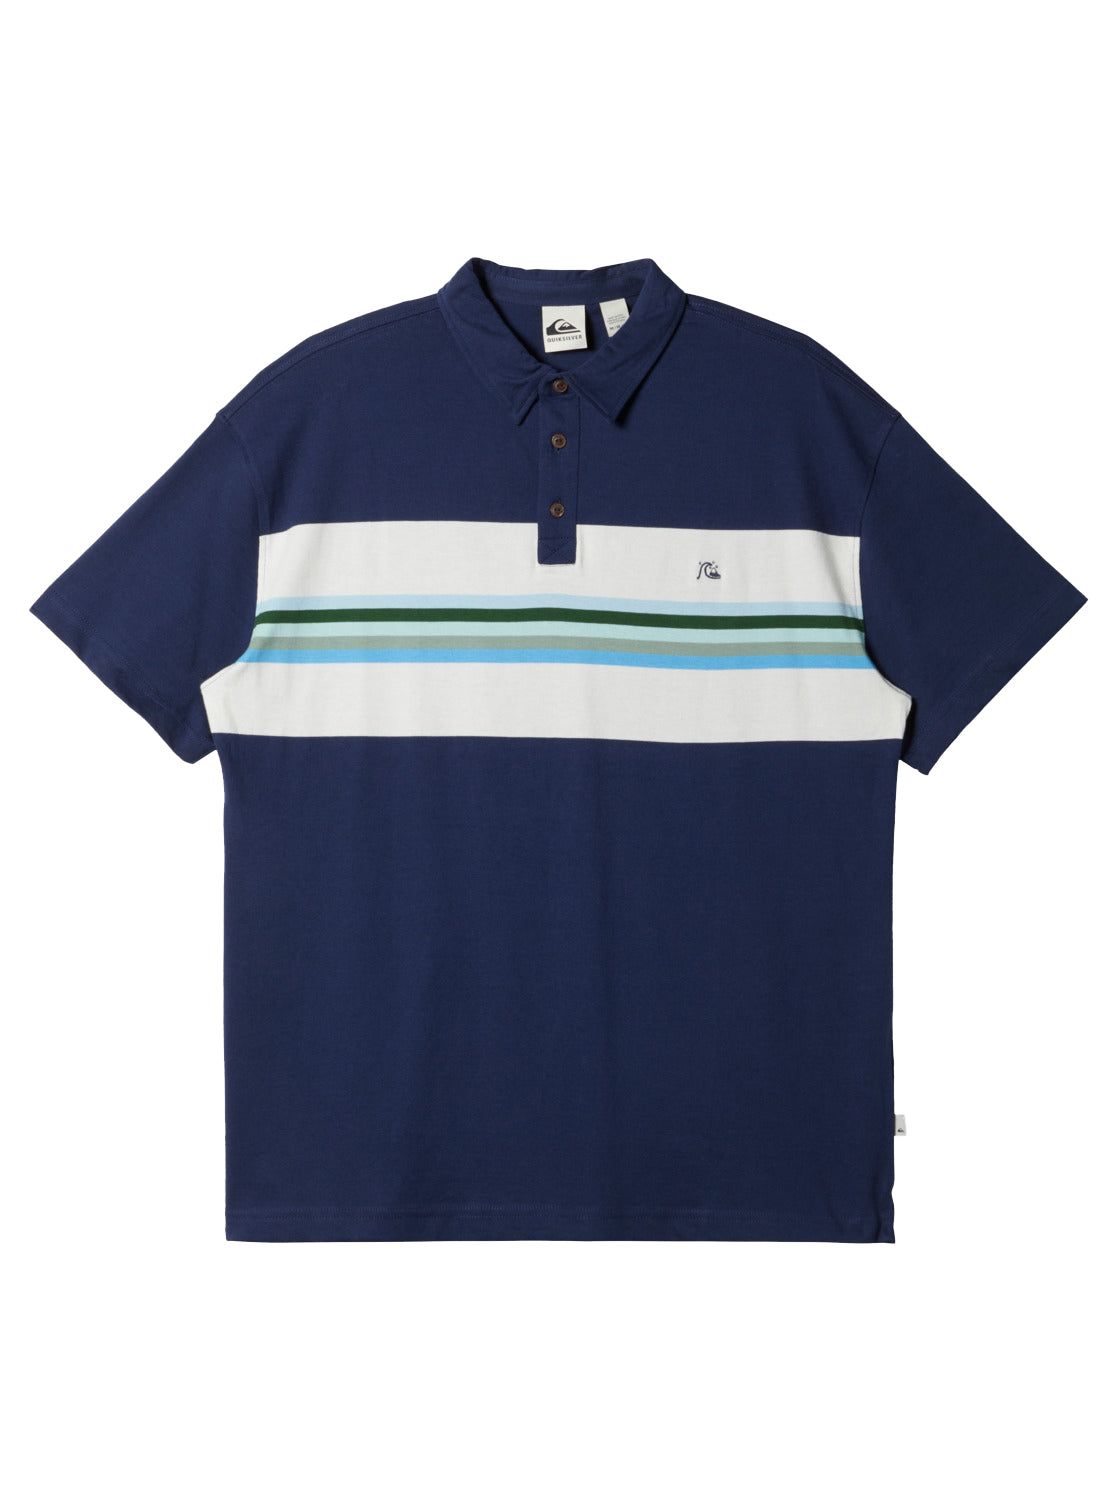 Quiksilver Alloy Days Polo Shirt BYM3 l